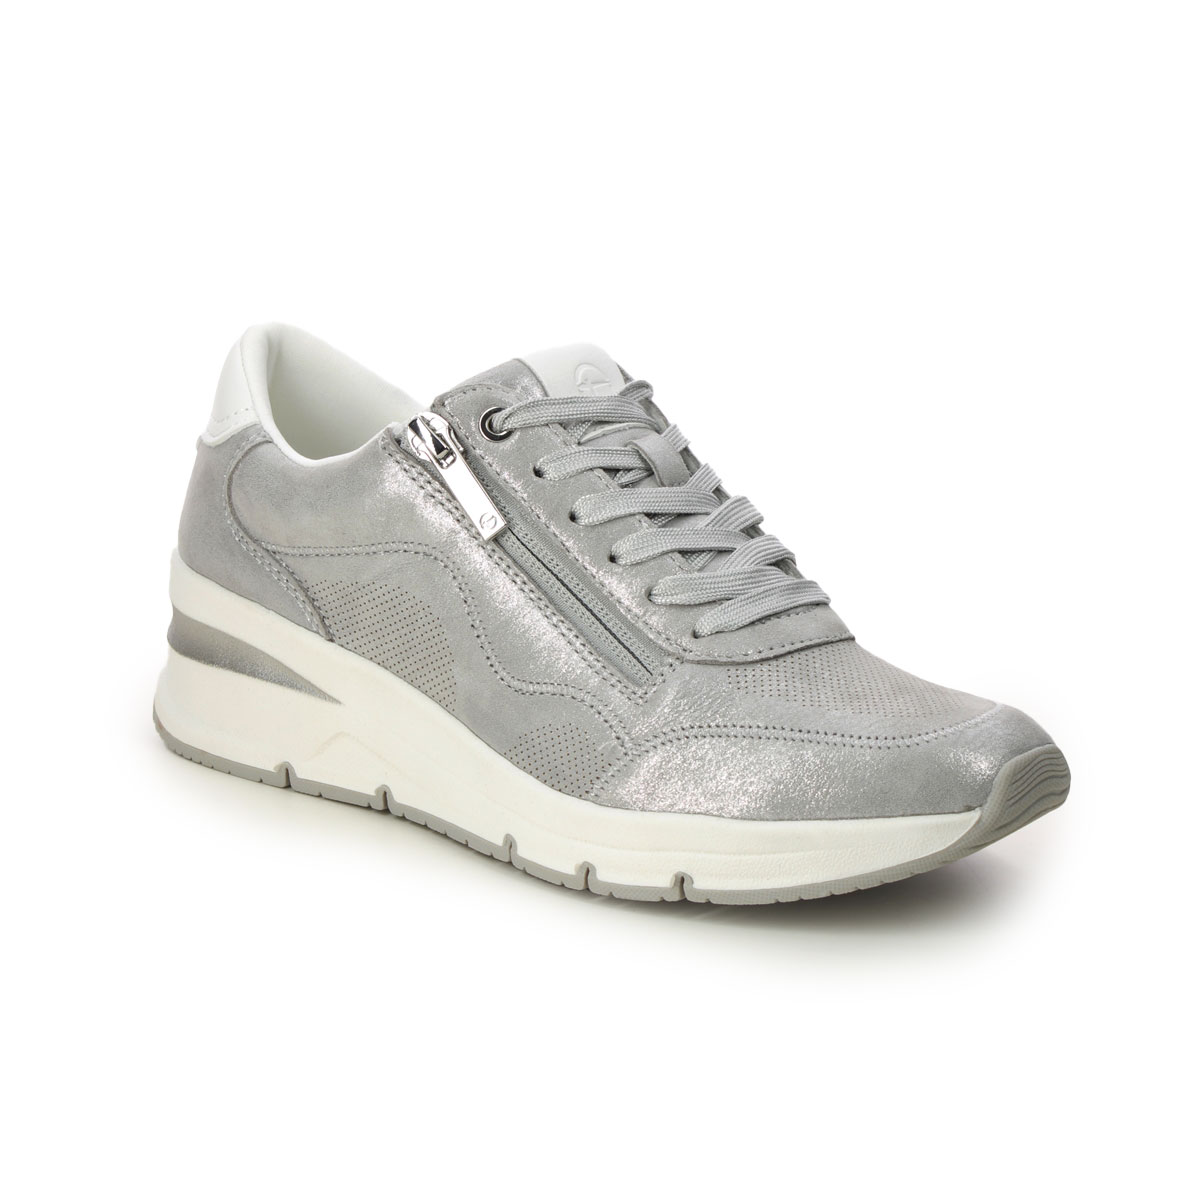 Tamaris Rea Zip Wedge Silver Womens trainers 23761-42-941 in a Plain Leather in Size 36